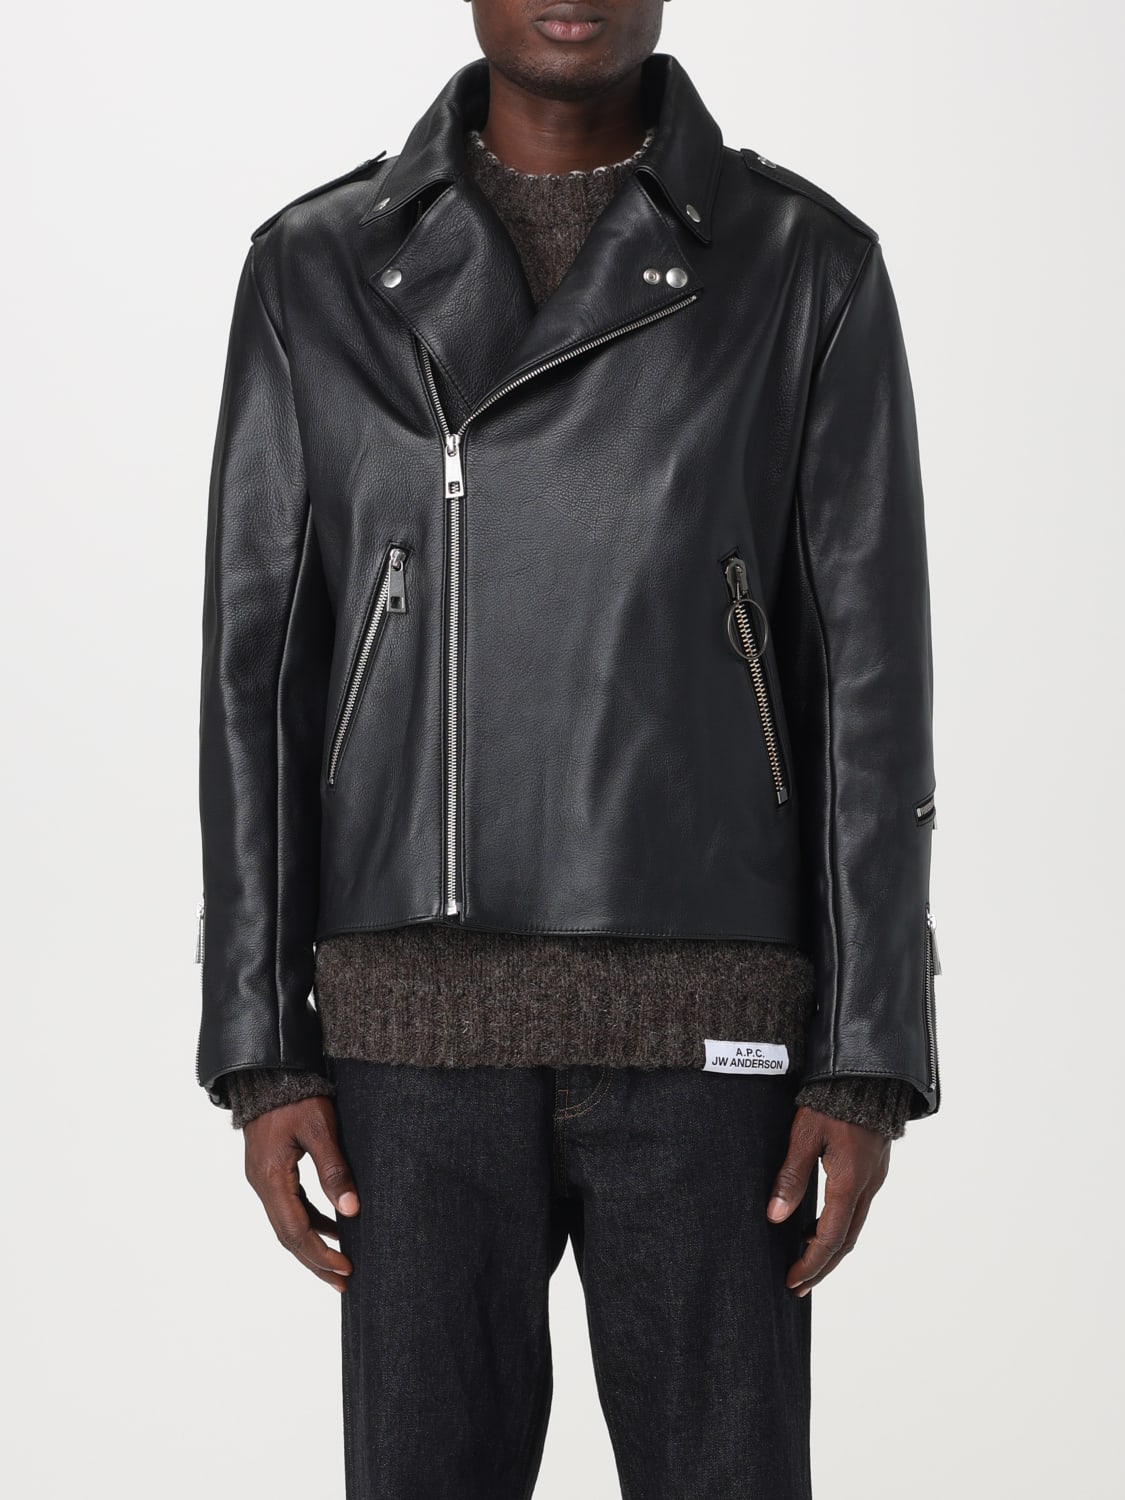 A.P.C. x JW Anderson leather jacket